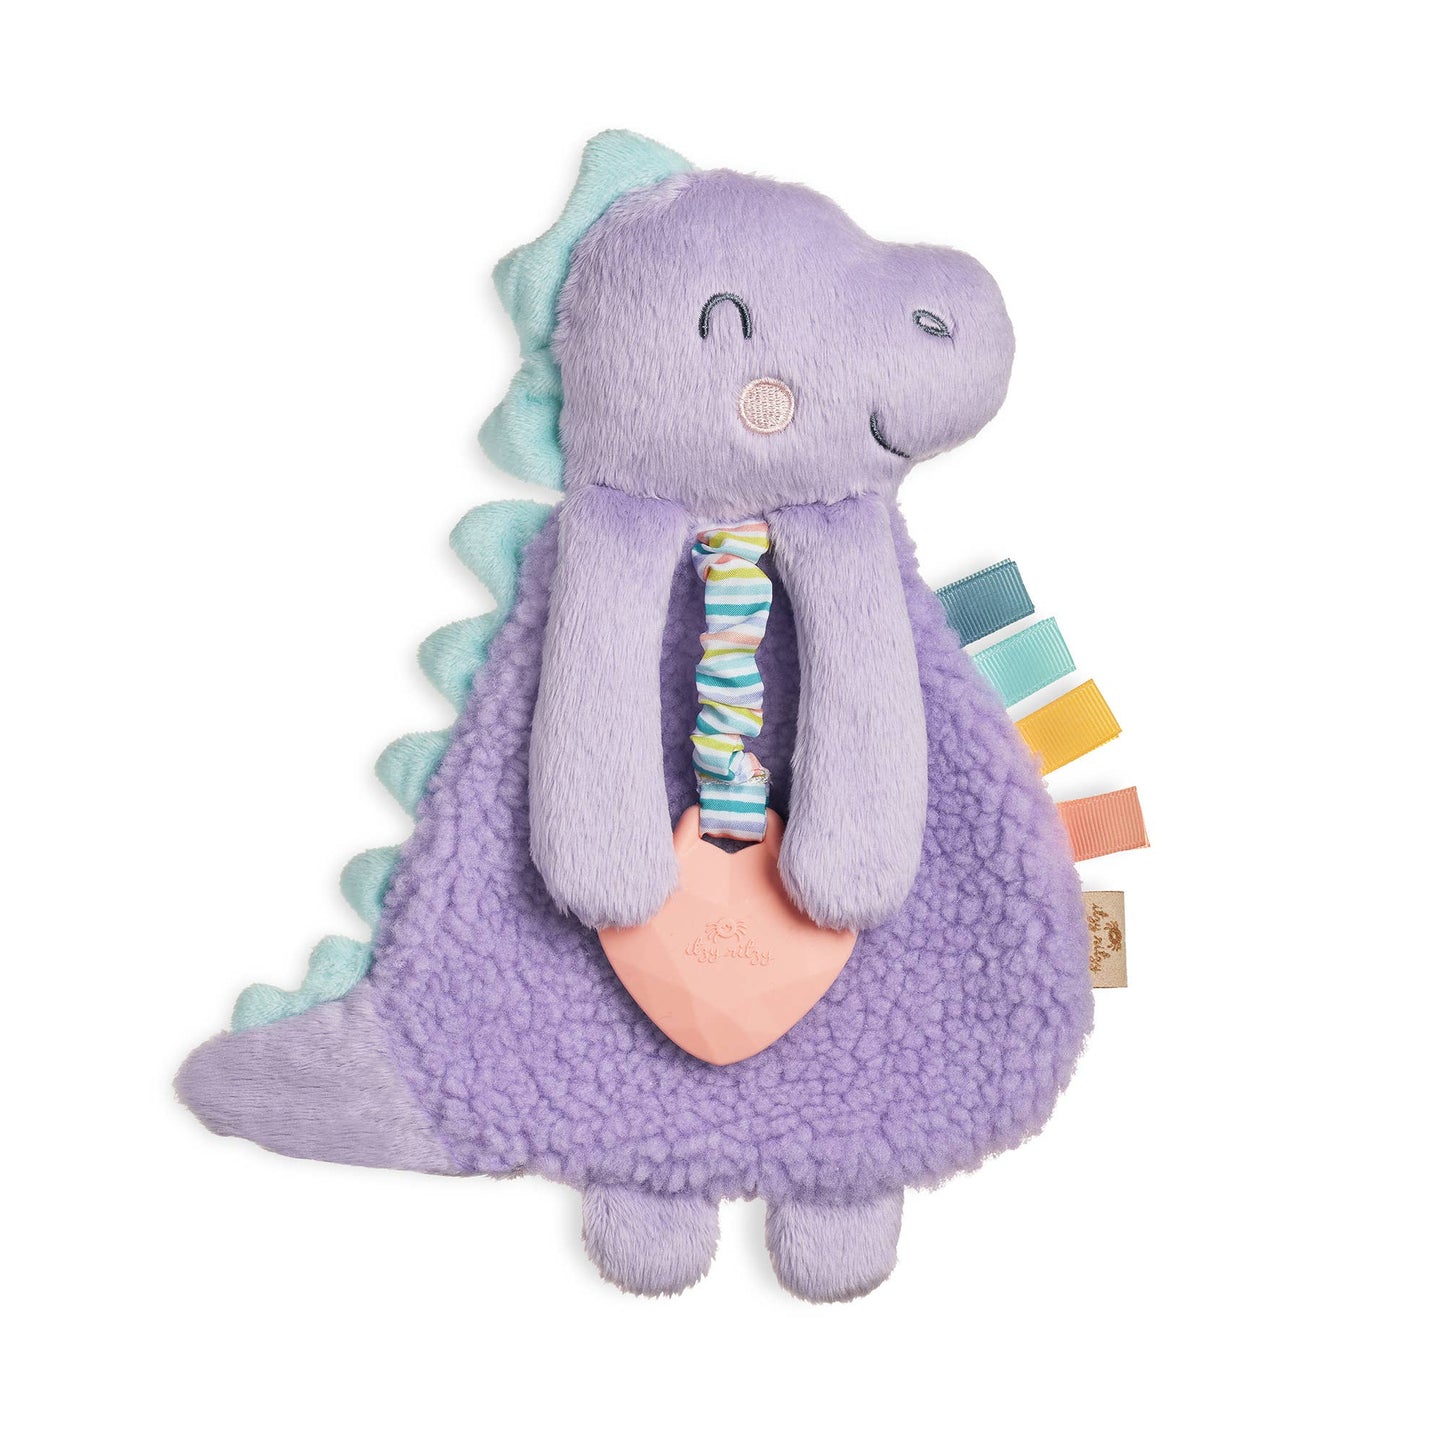 Itzy Lovey™ Plush with Silicone Teether Toy by Itzy Ritzy